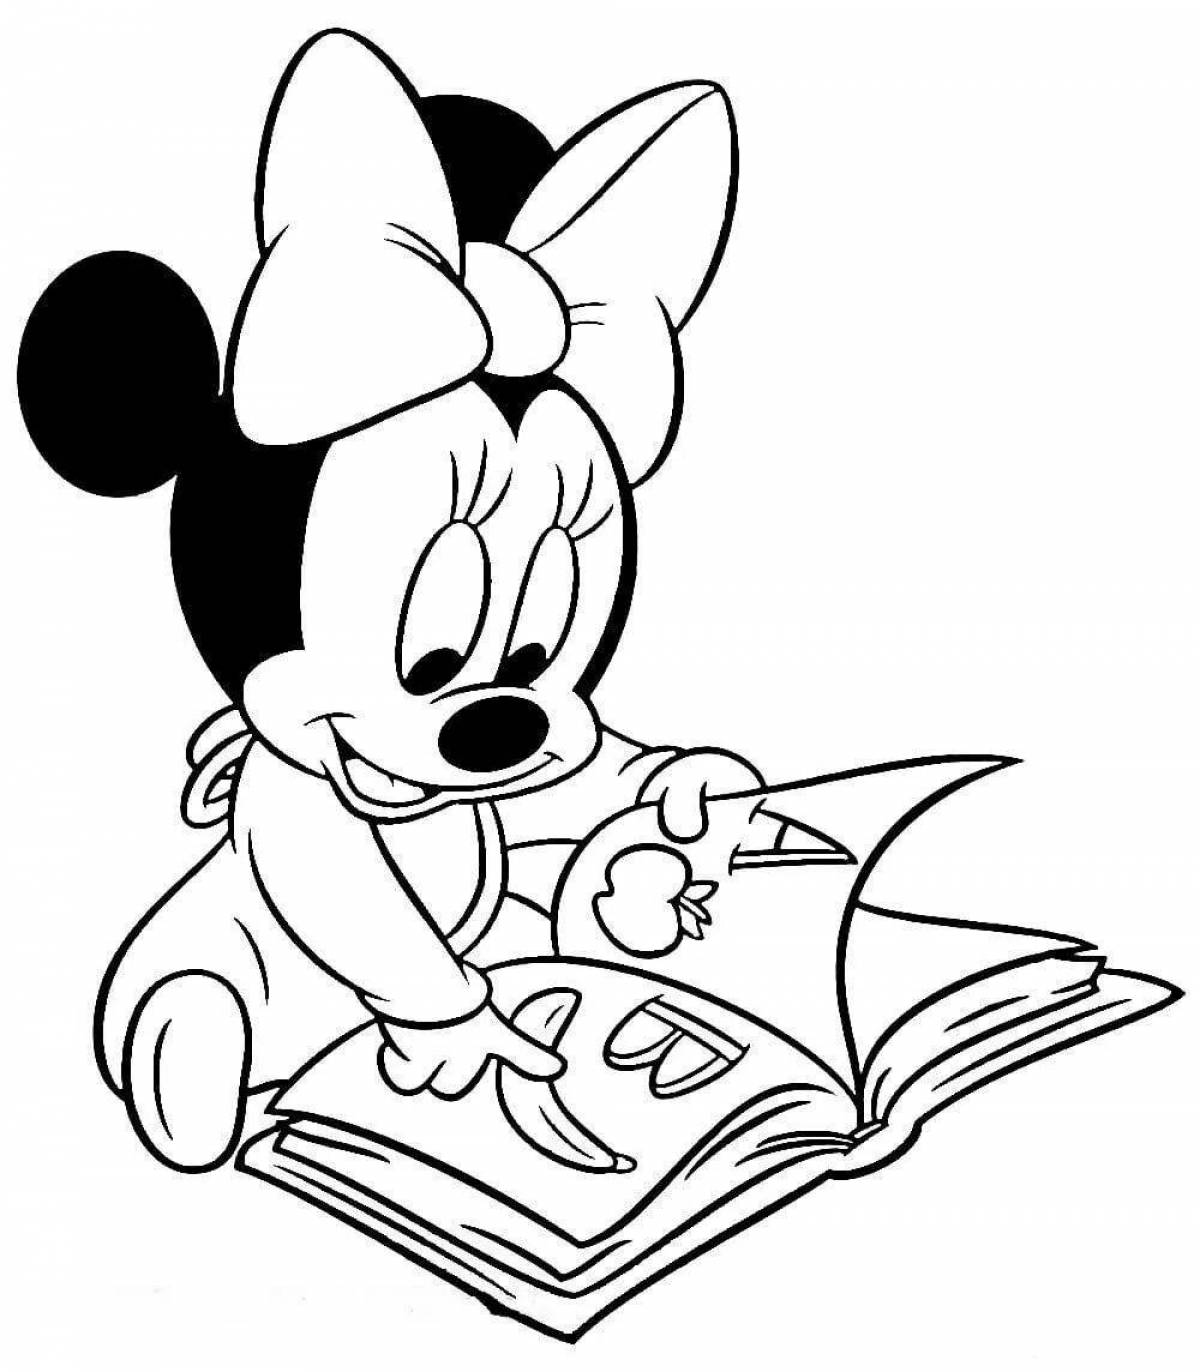 Playtime coloring page minnie mouse for kids